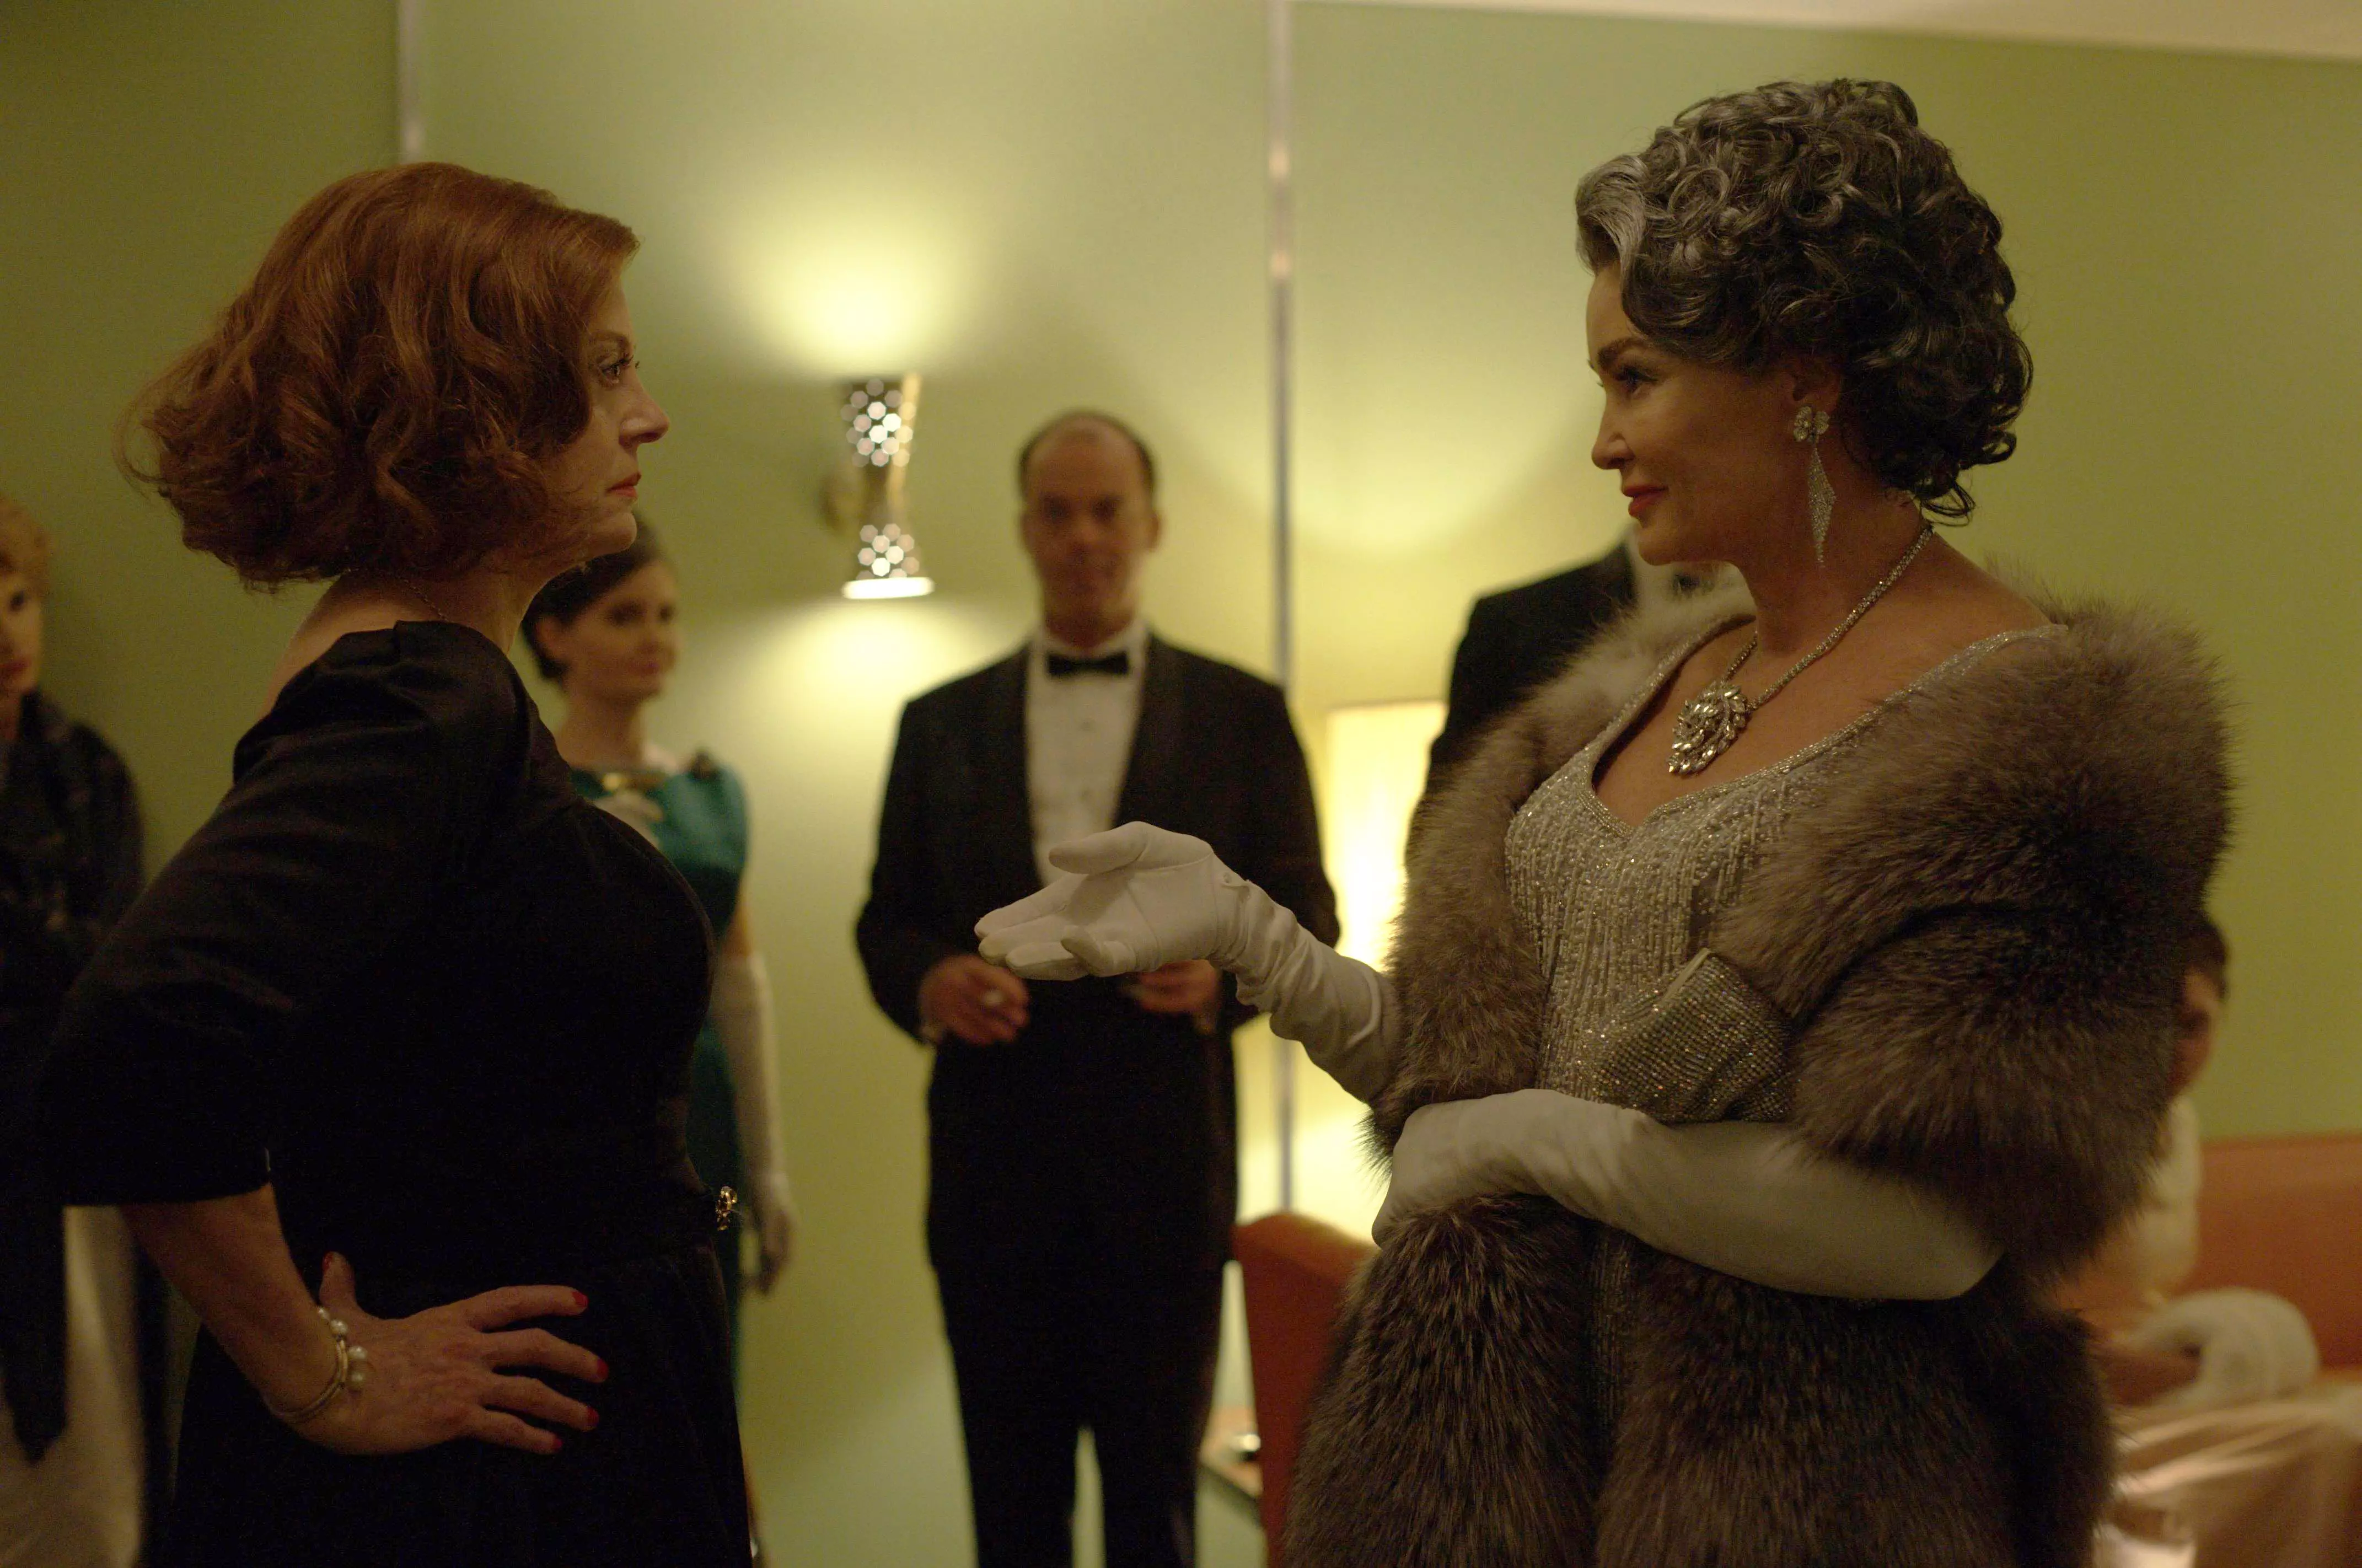 Susan Sarandon as Bette Davis and Jessica Lange as Joan Crawford in FX’s “Feud: Bette and Joan.”